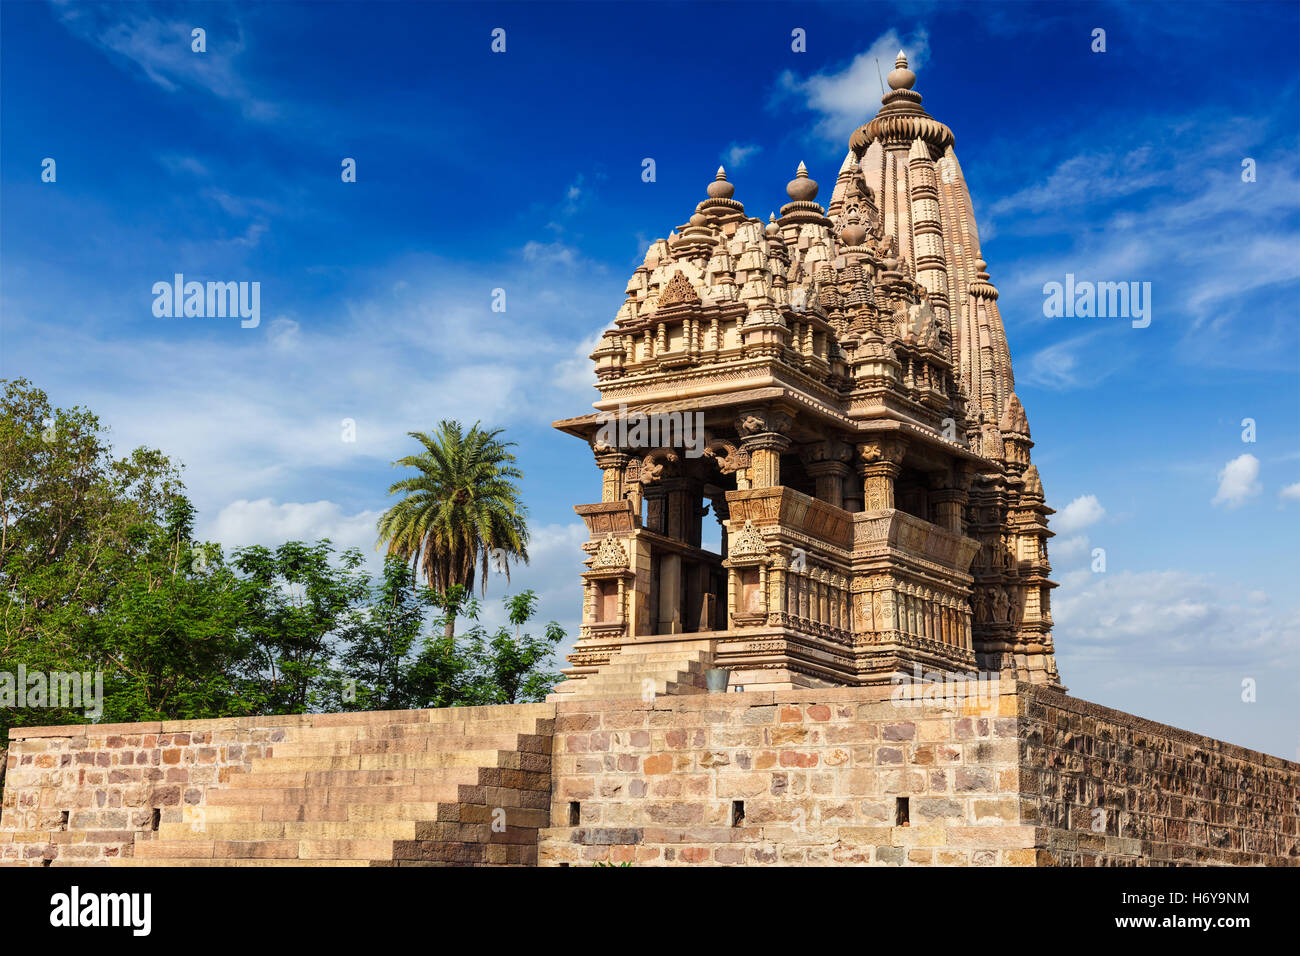 Famous temples of Khajuraho with sculptures, India Stock Photo